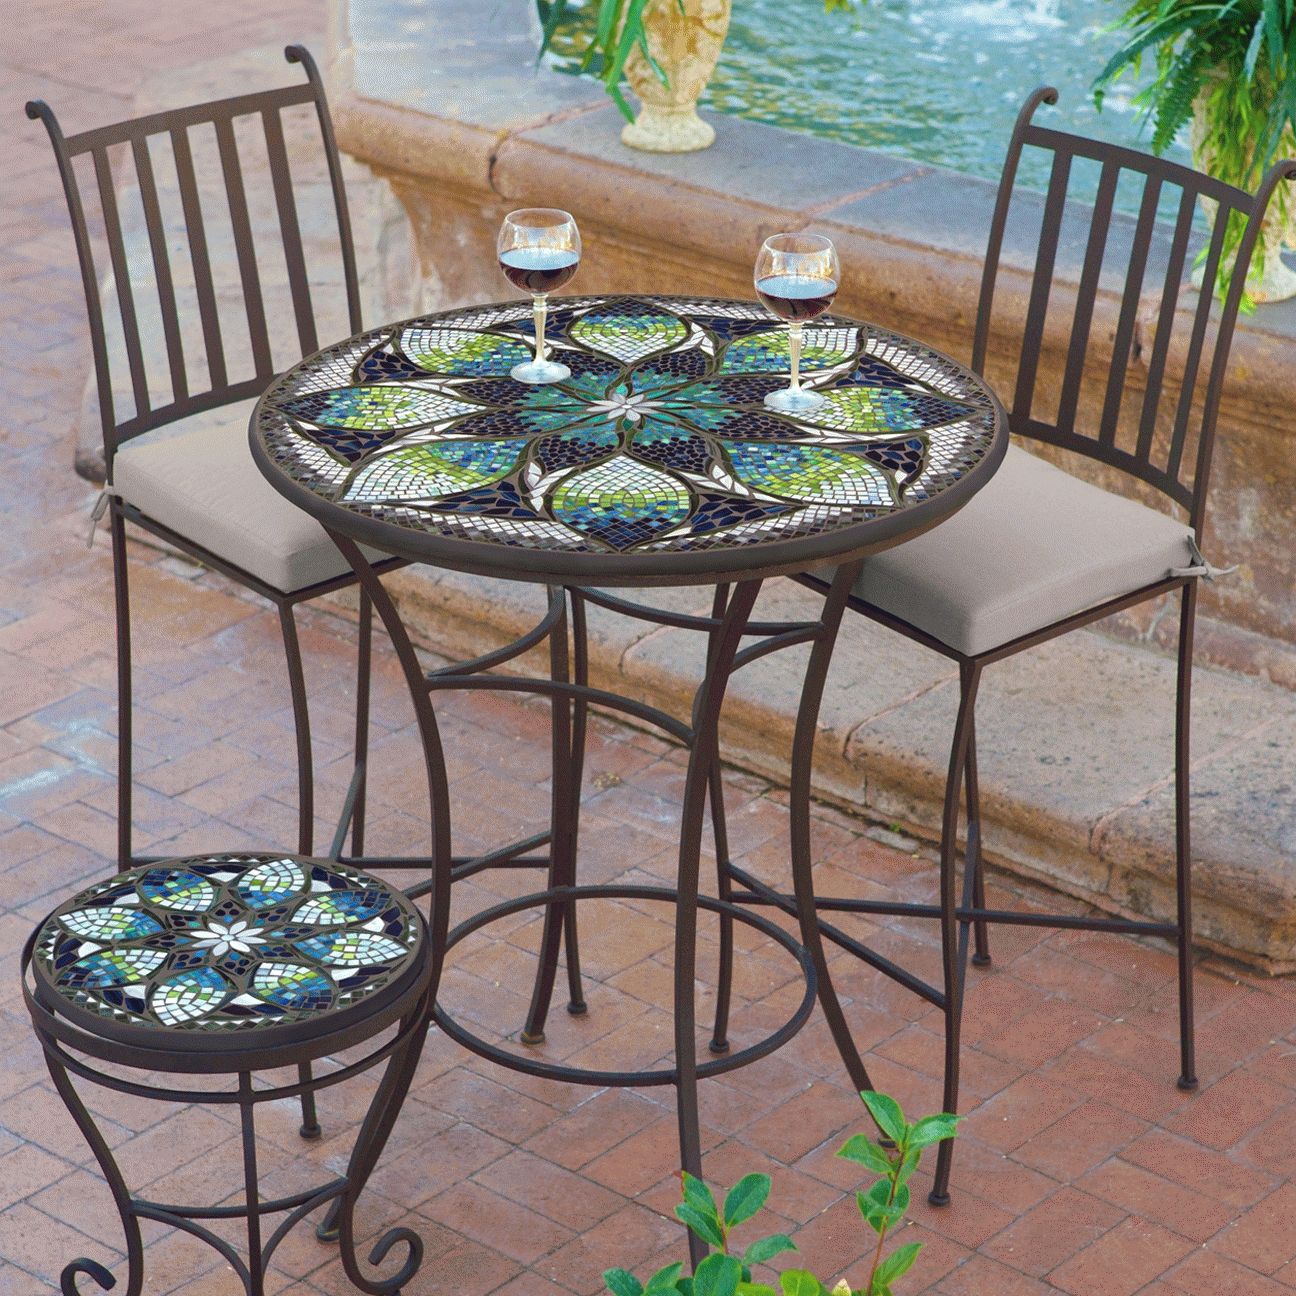 Most Popular Mosaic Dining Tables For Sale Inside Neille Olson – Knf Designs (View 8 of 25)